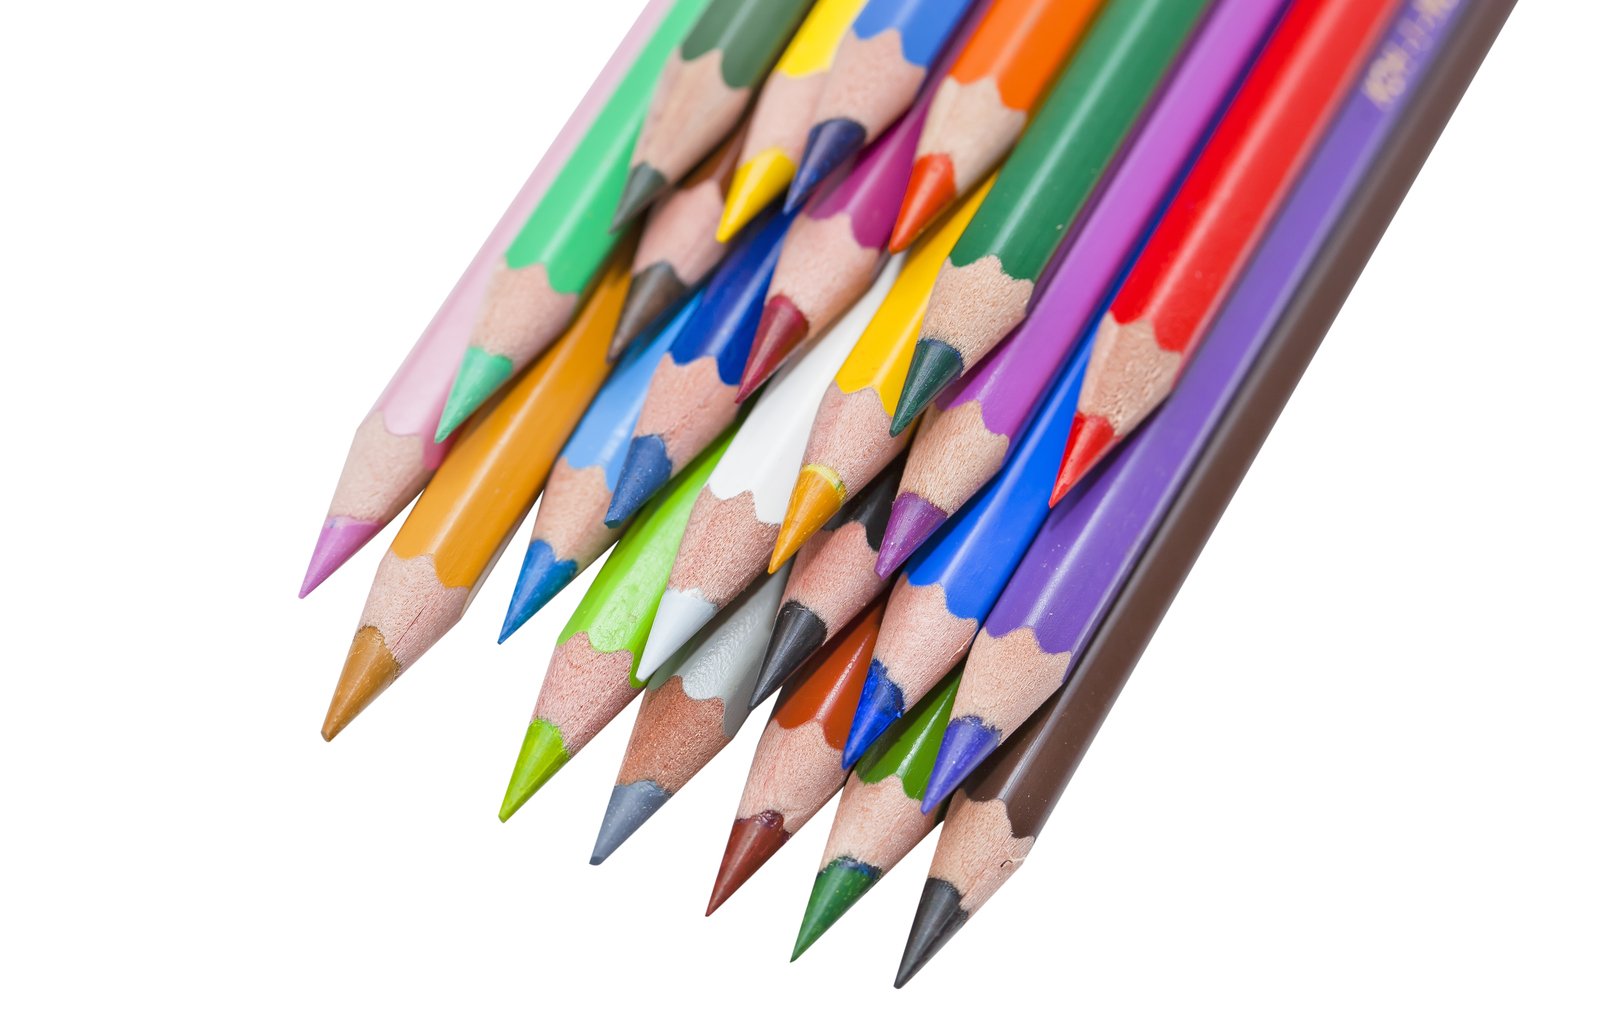 closeup view of colored pencils against a white background